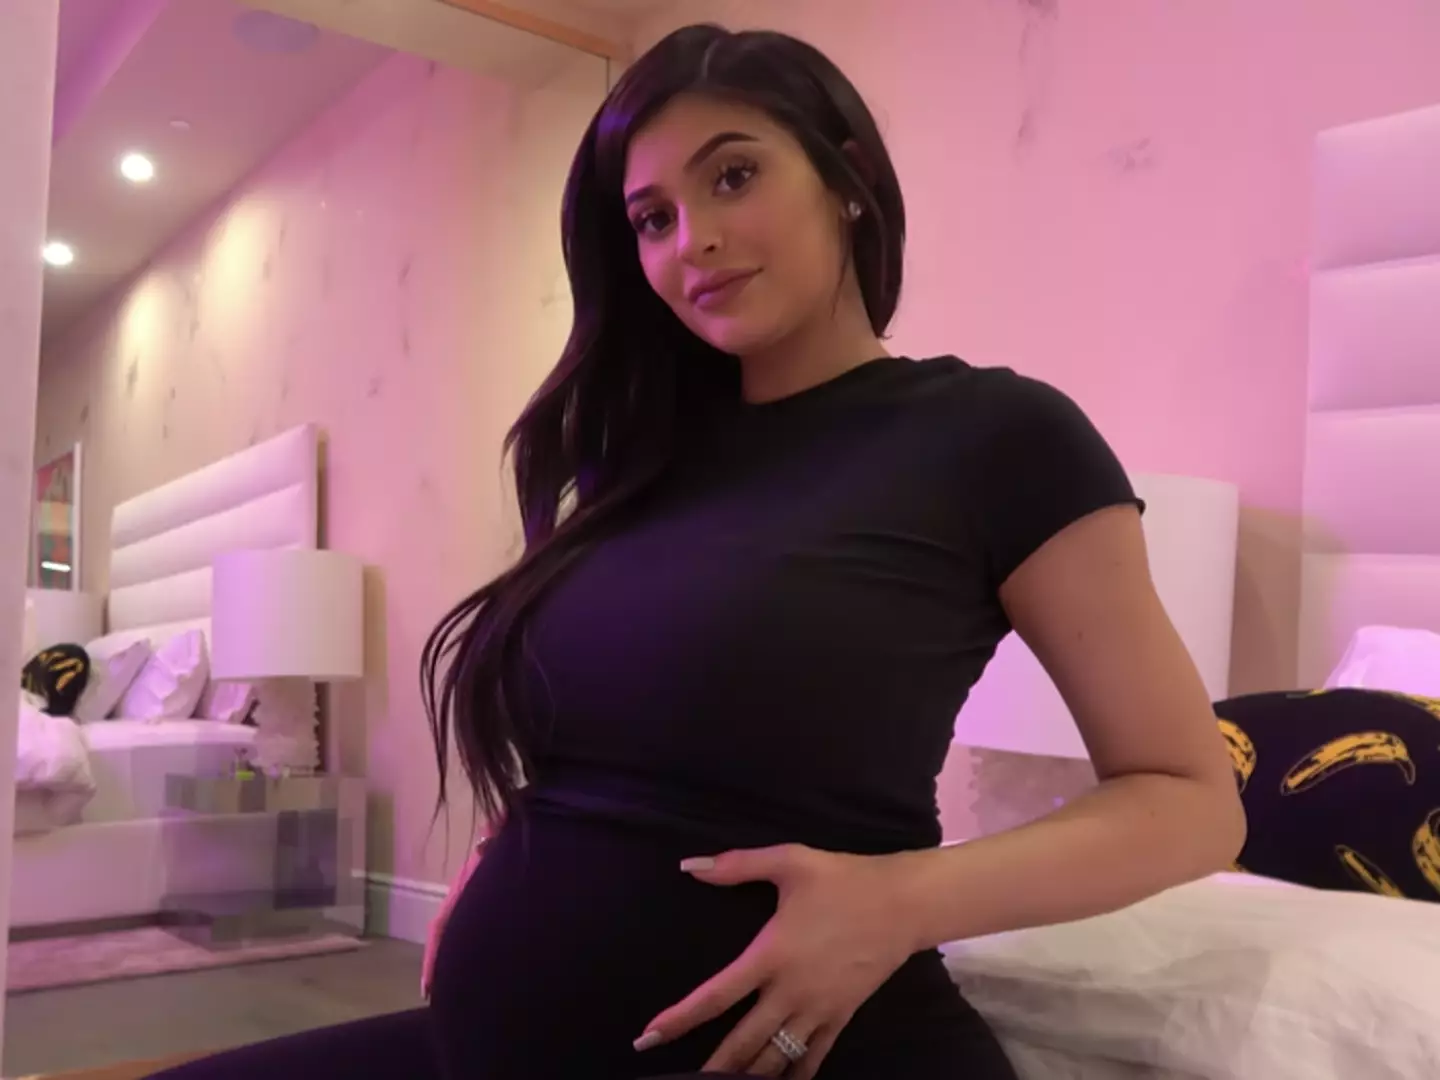 Kylie kept her baby news private last time (